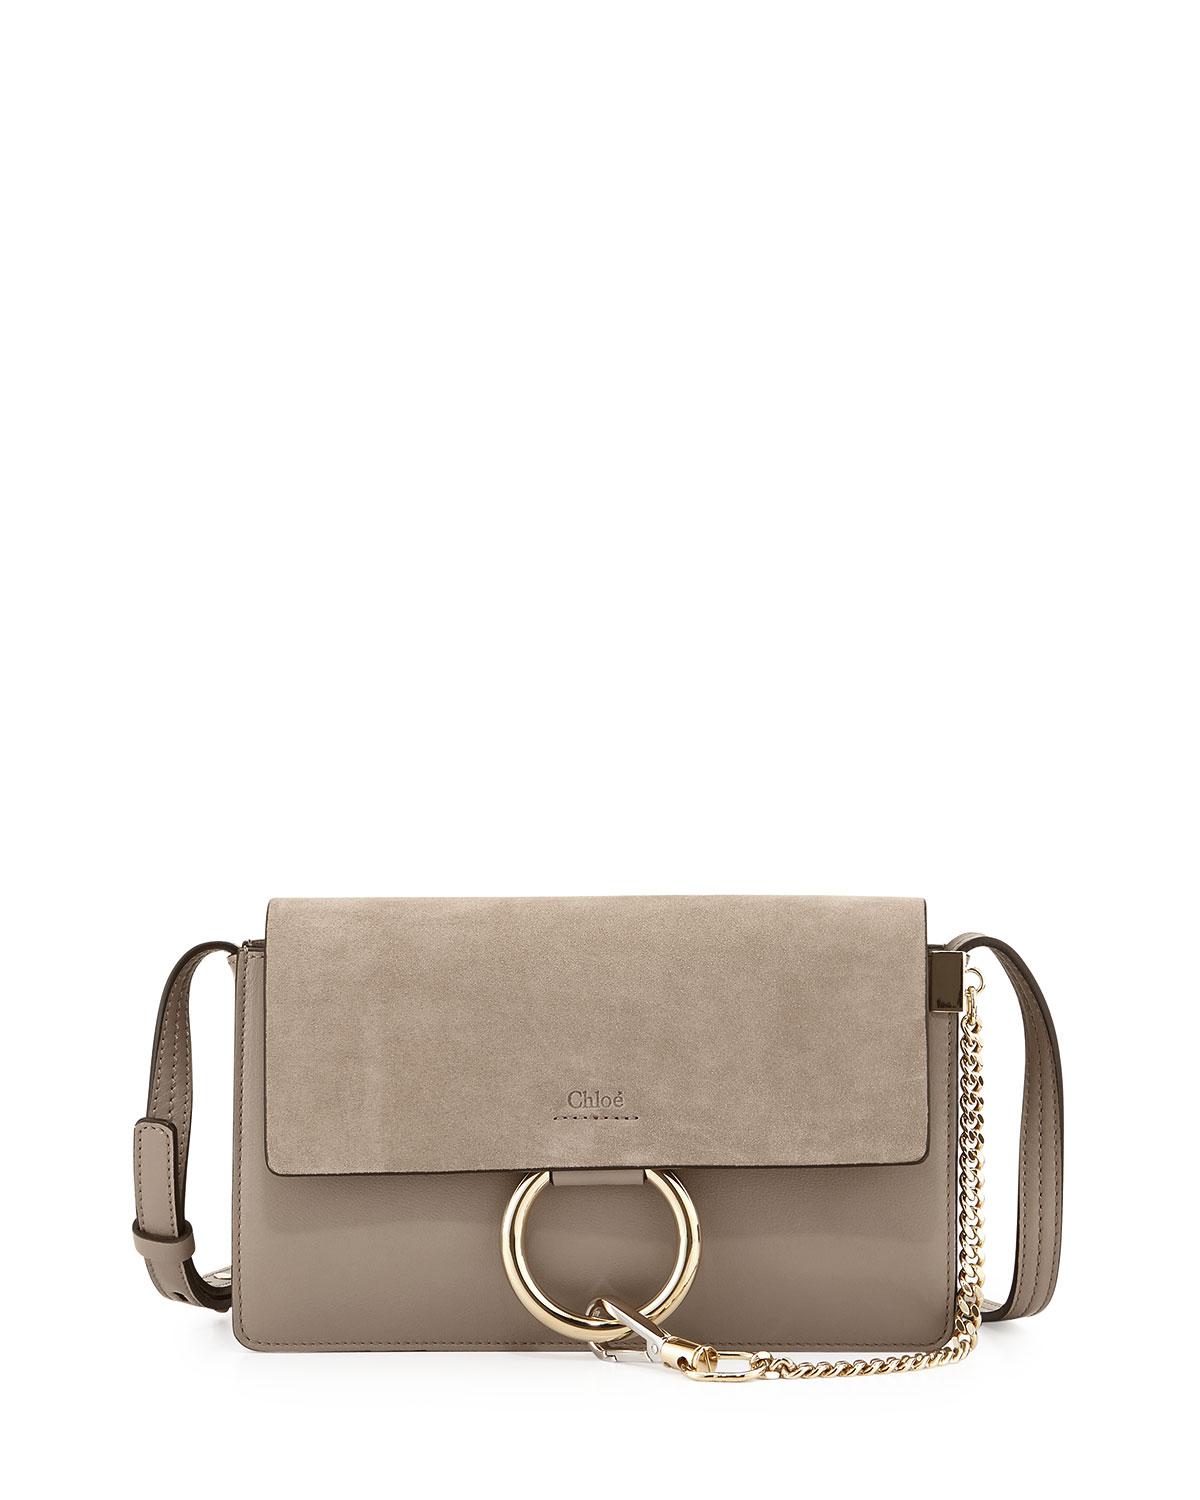 Chloé Faye Small Suede Shoulder Bag in Gray | Lyst